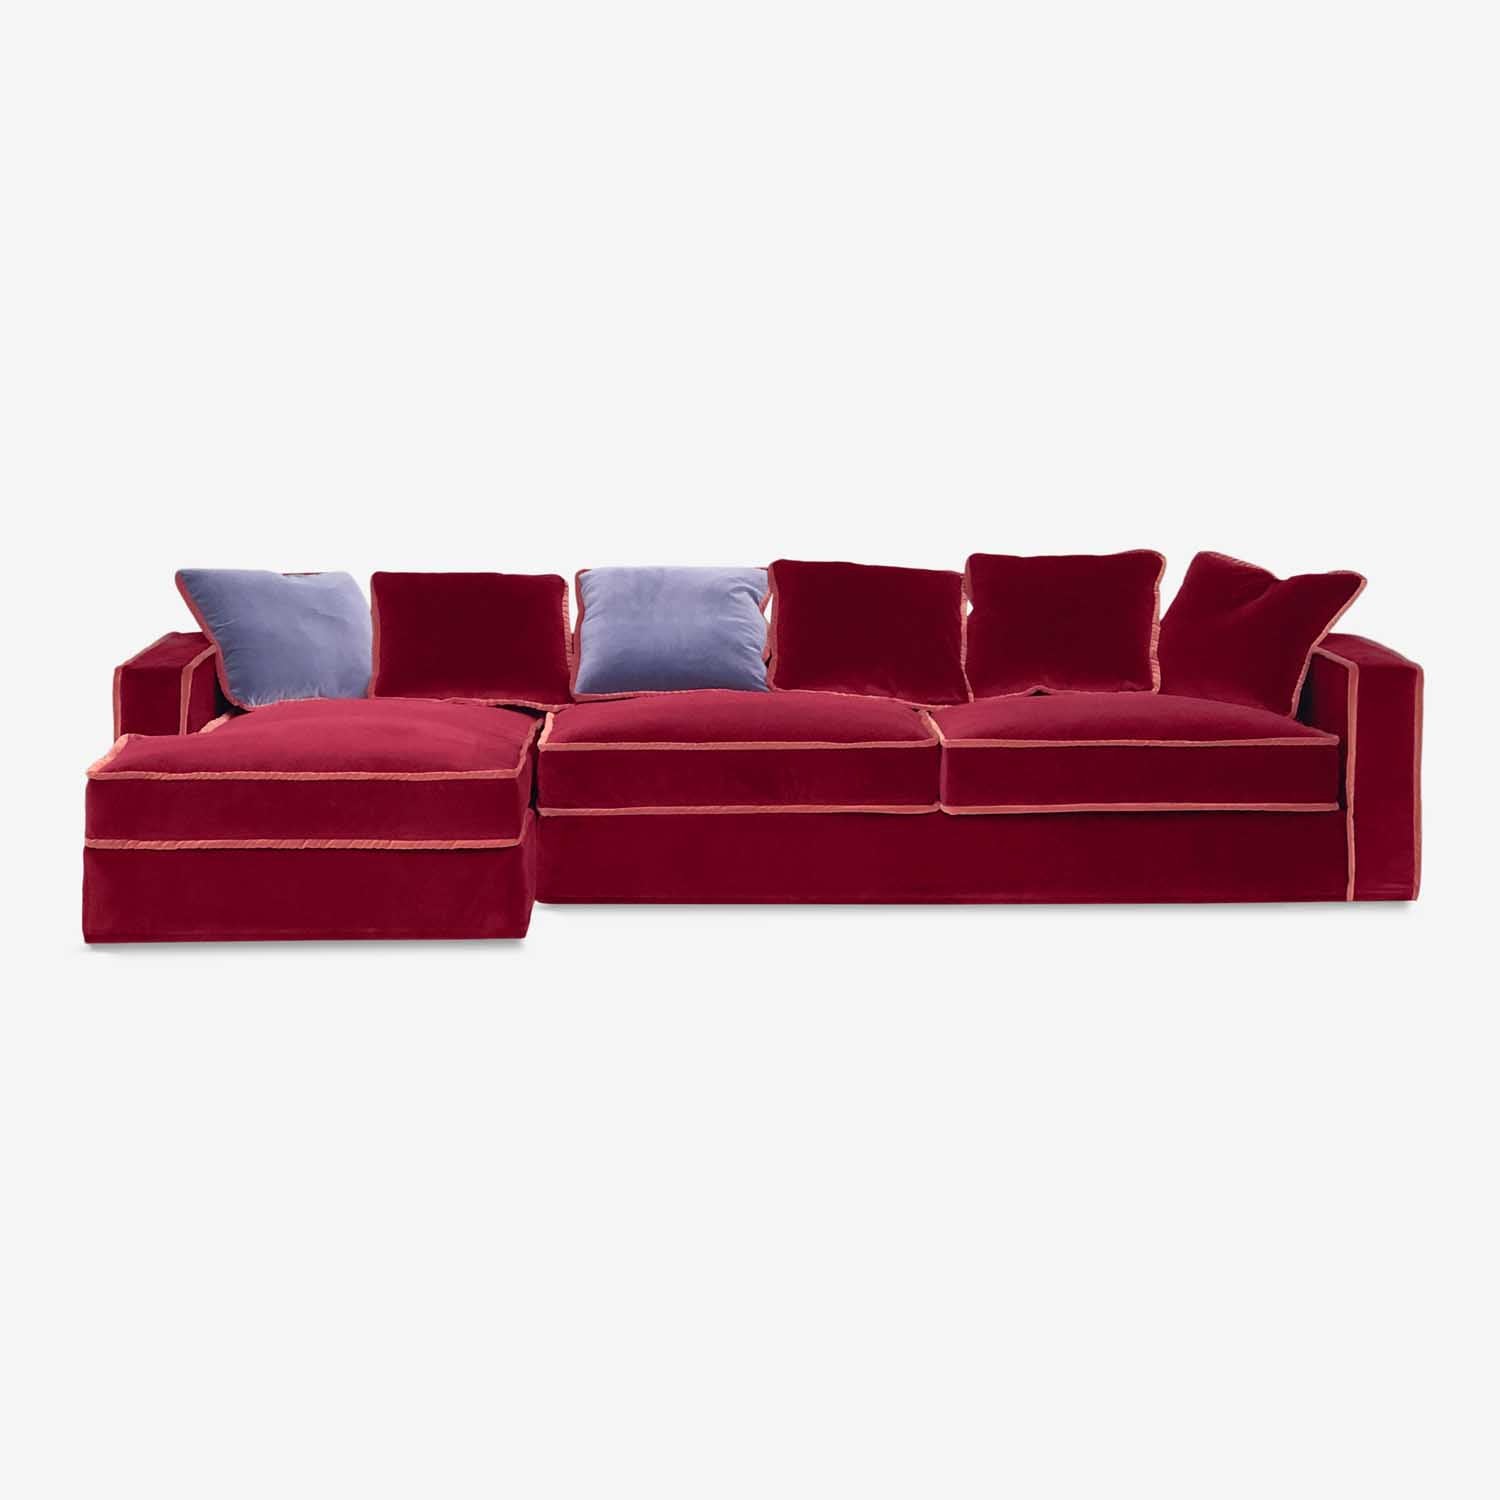 Luxurious Sofa with Contrasting Trim – Visual Appeal